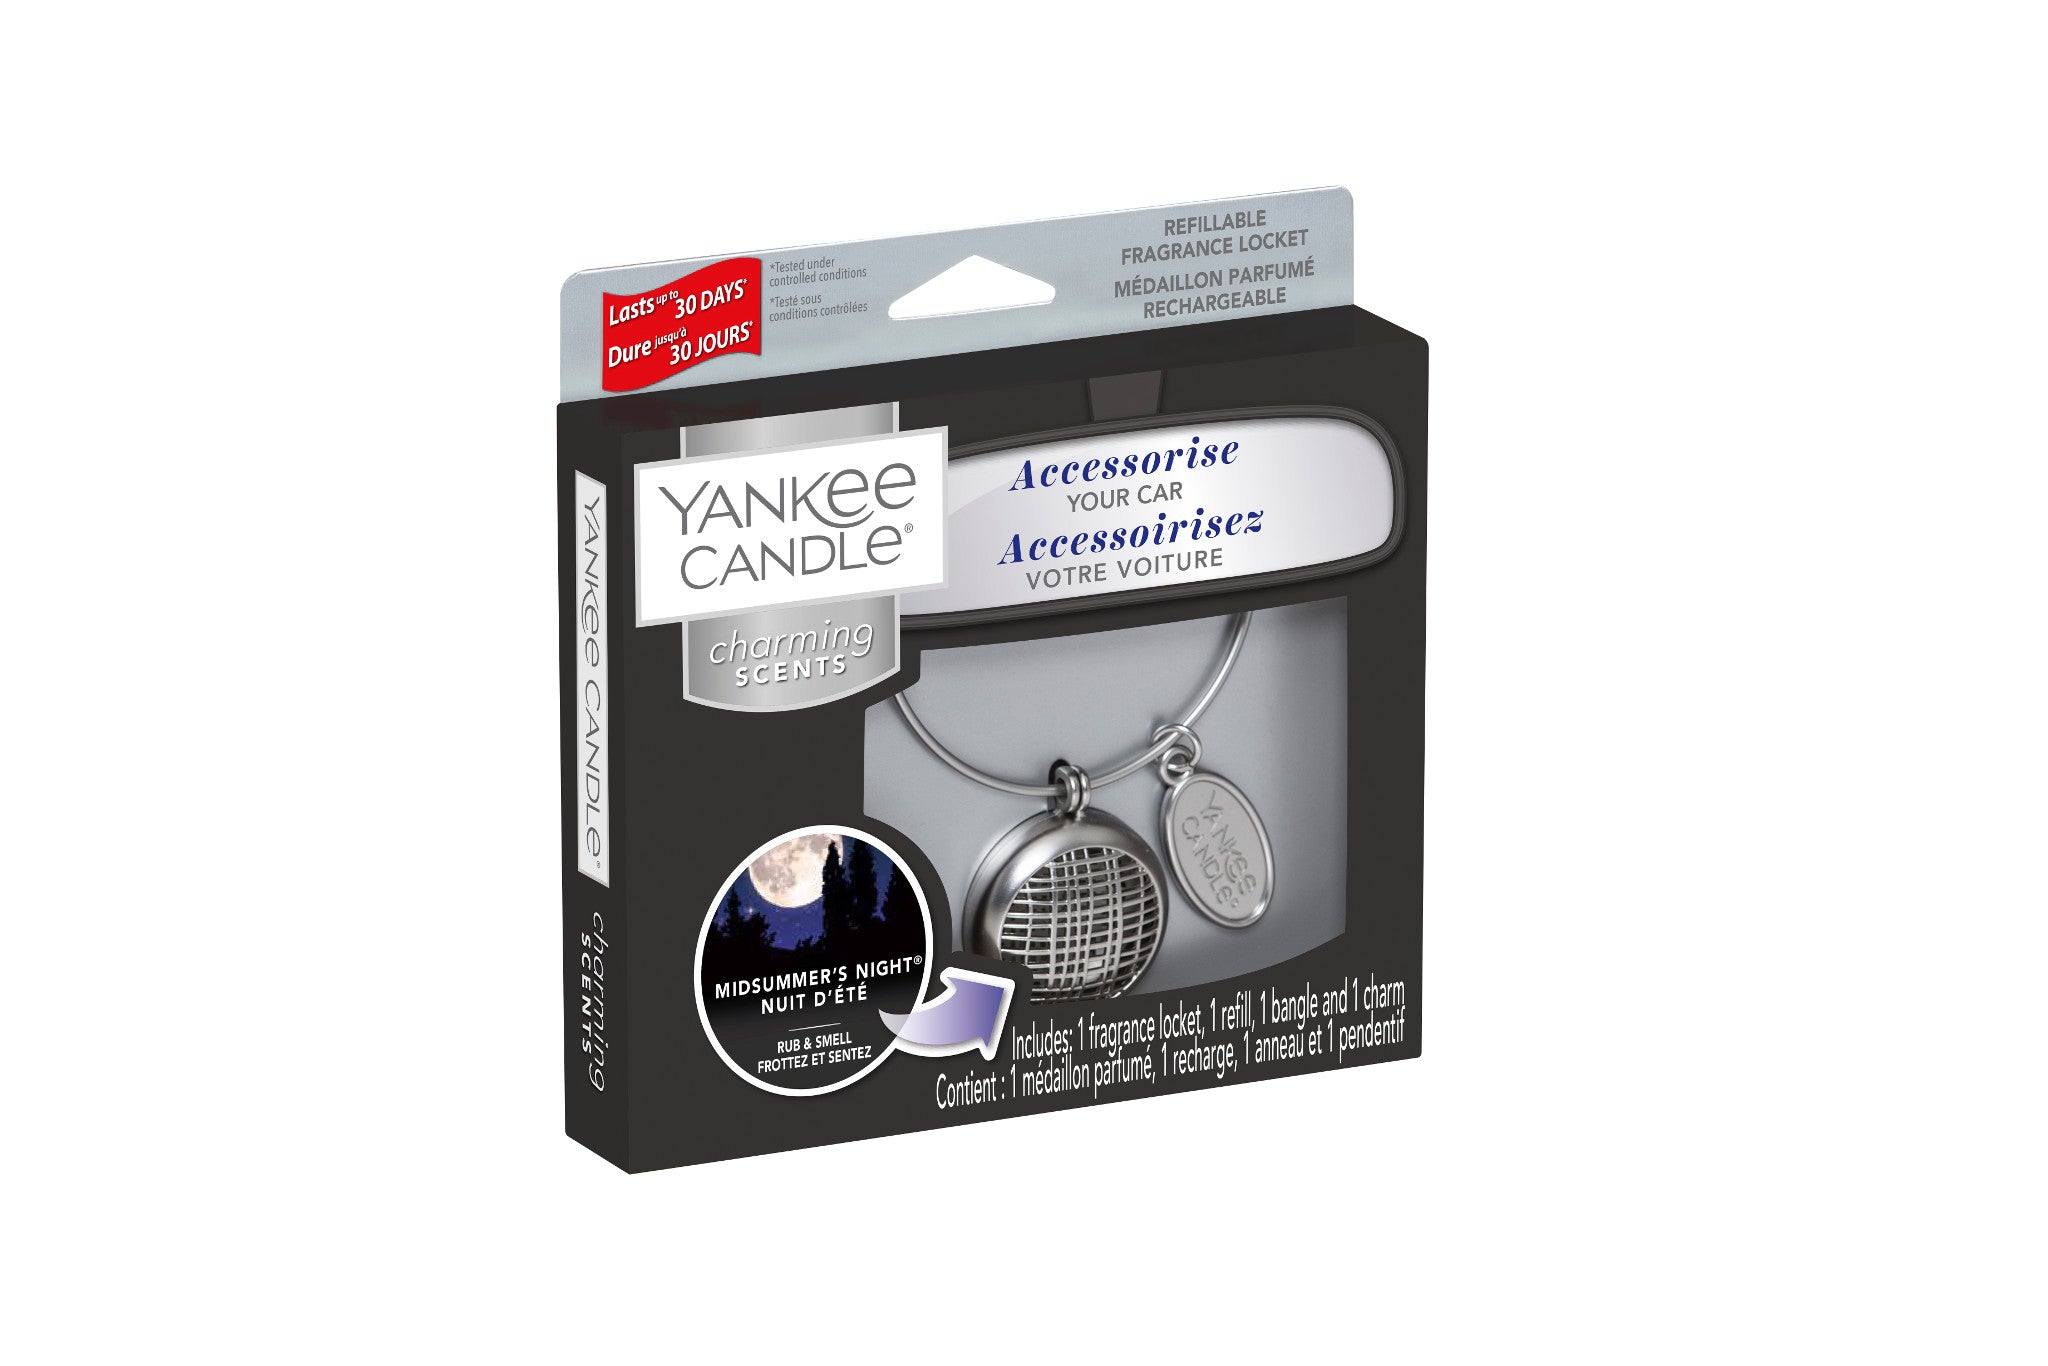 MIDSUMMER'S NIGHT -Yankee Candle- Charming Scents Kit Iniziale Linear